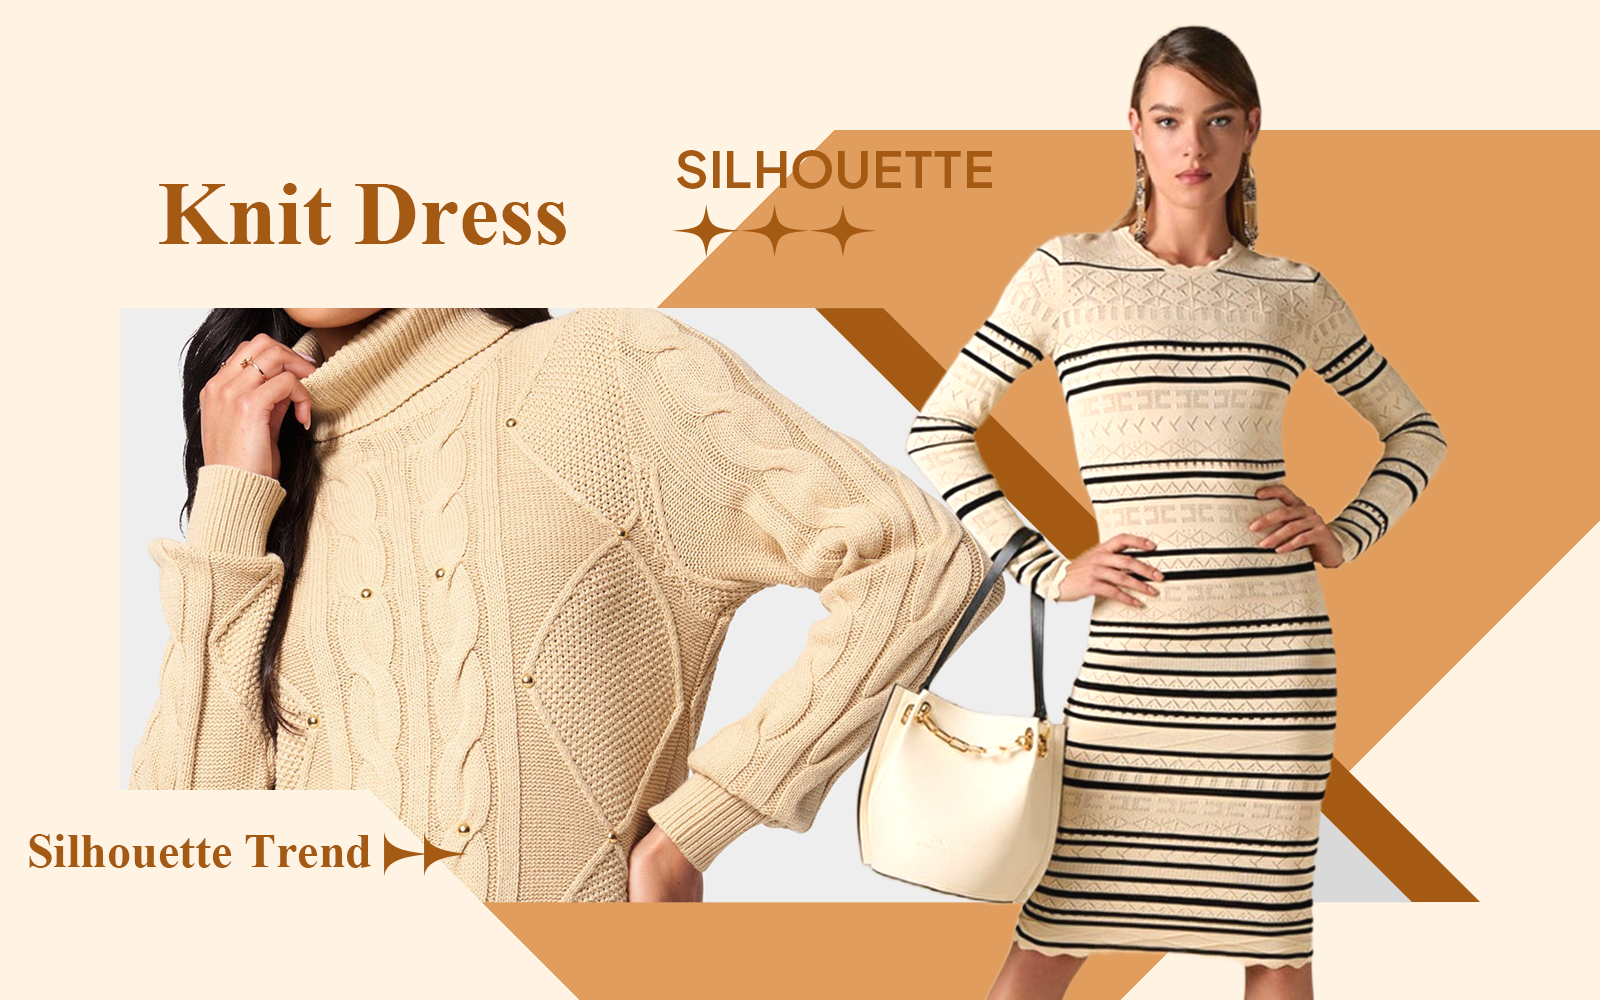 The Silhouette Trend for Women's Knit Dress